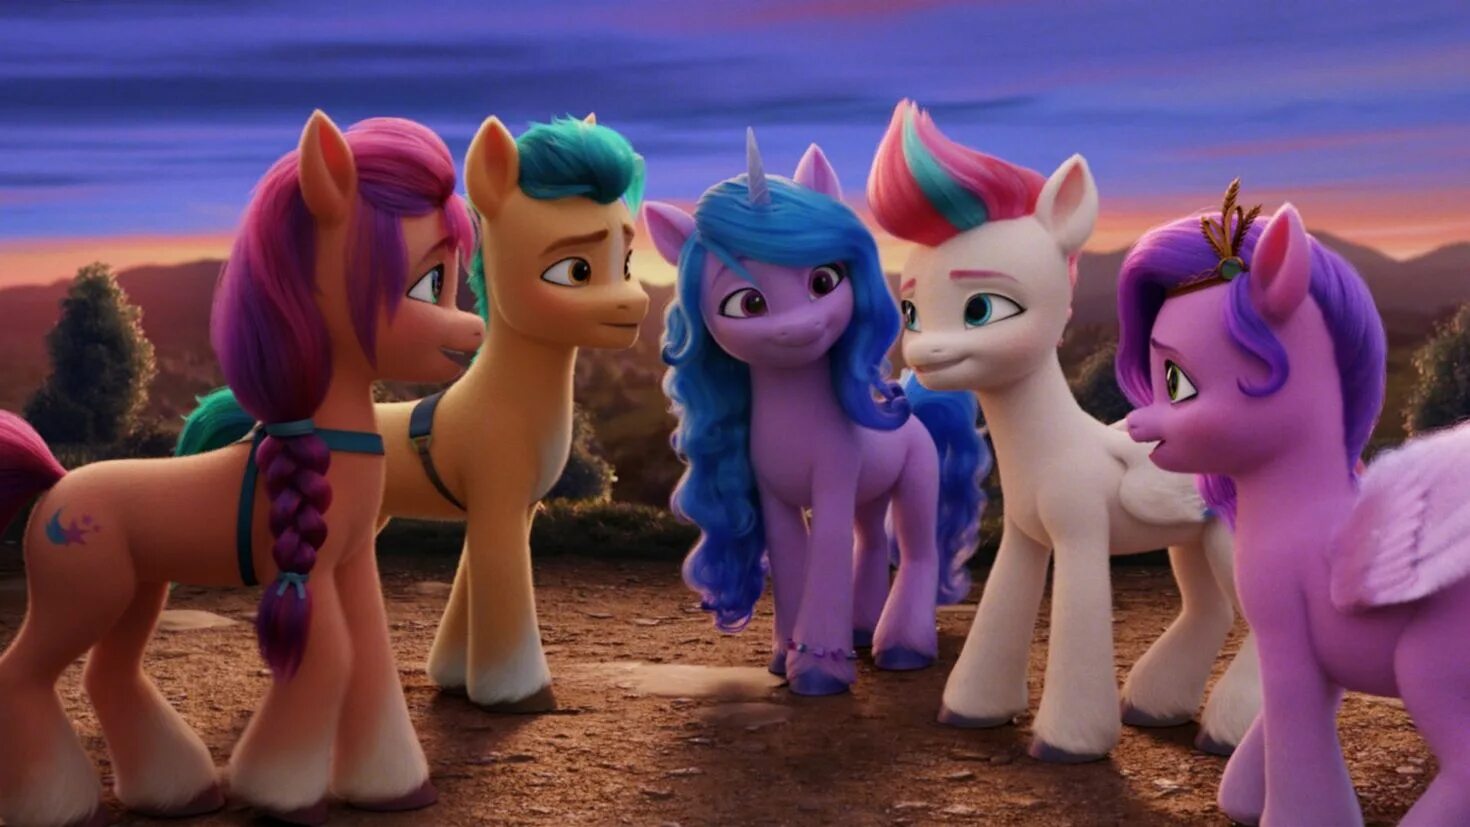 My new buyings. My little Pony новое поколение 2021. МЛП g5 Санни. Санни старскаут.